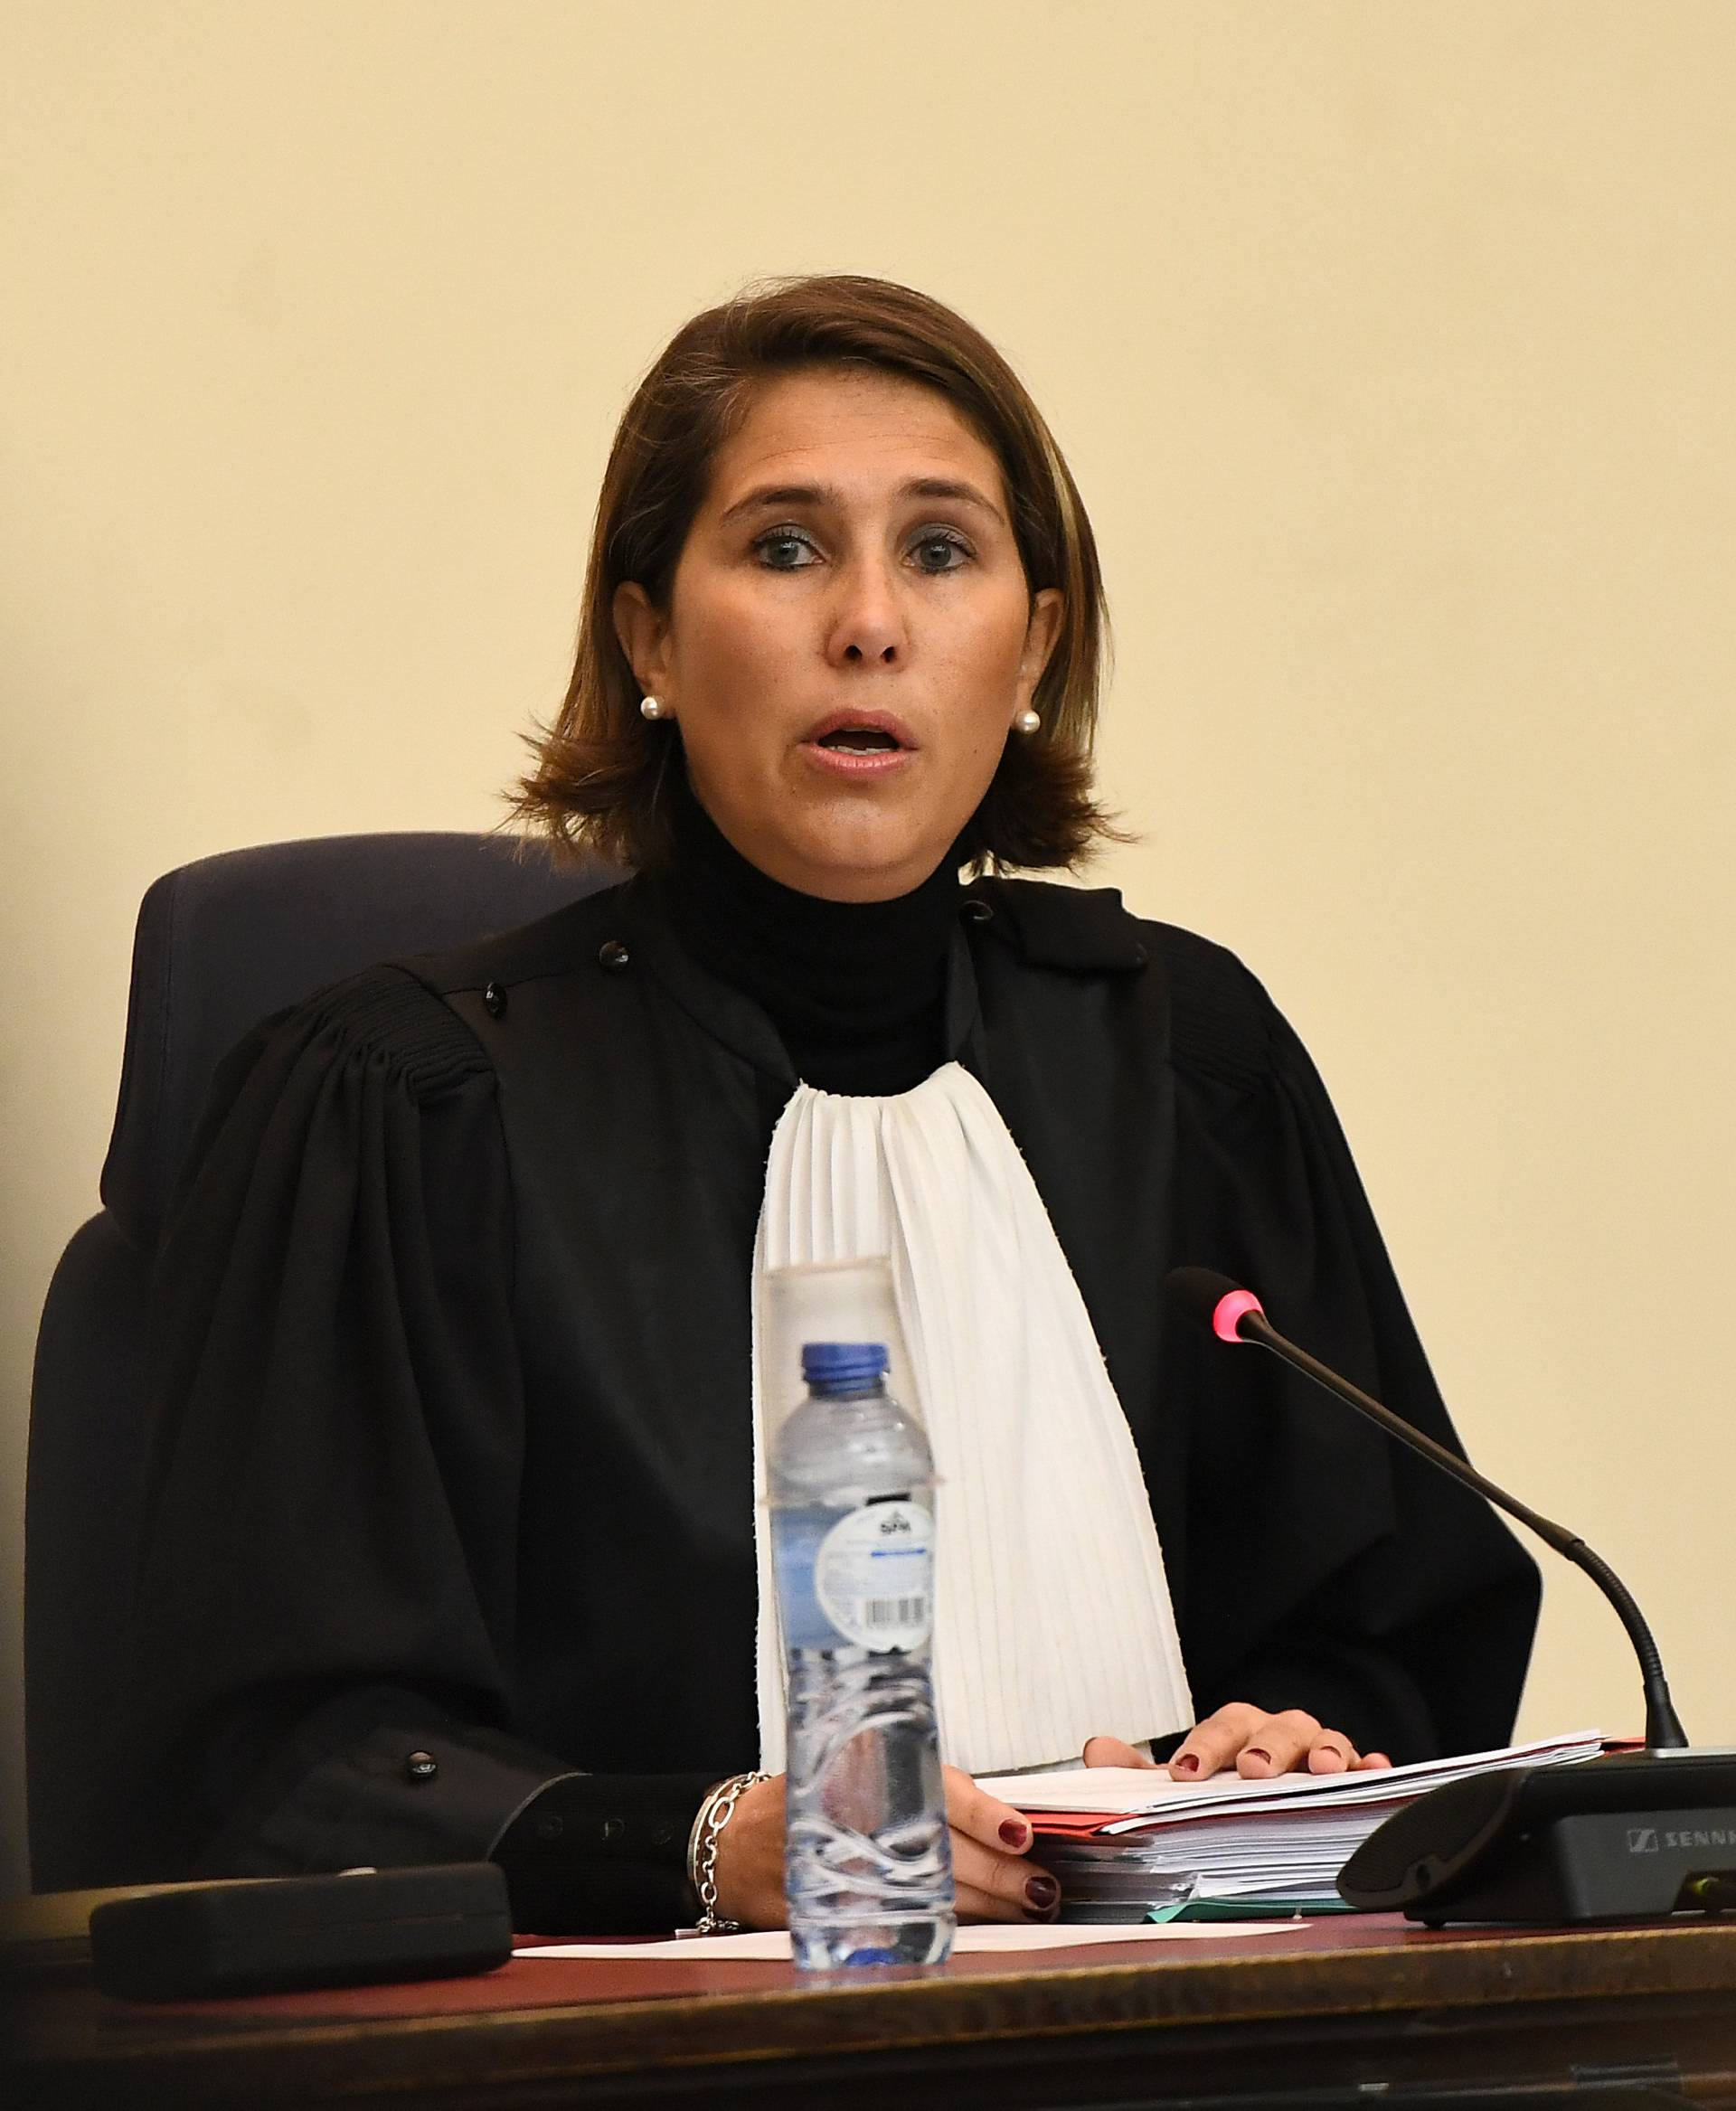 Belgian judge Marie-France Keutgen is seen at the start of the trial of Salah Abdeslam, one of the suspects in the 2015 Islamic State attacks in Paris, in Brussels